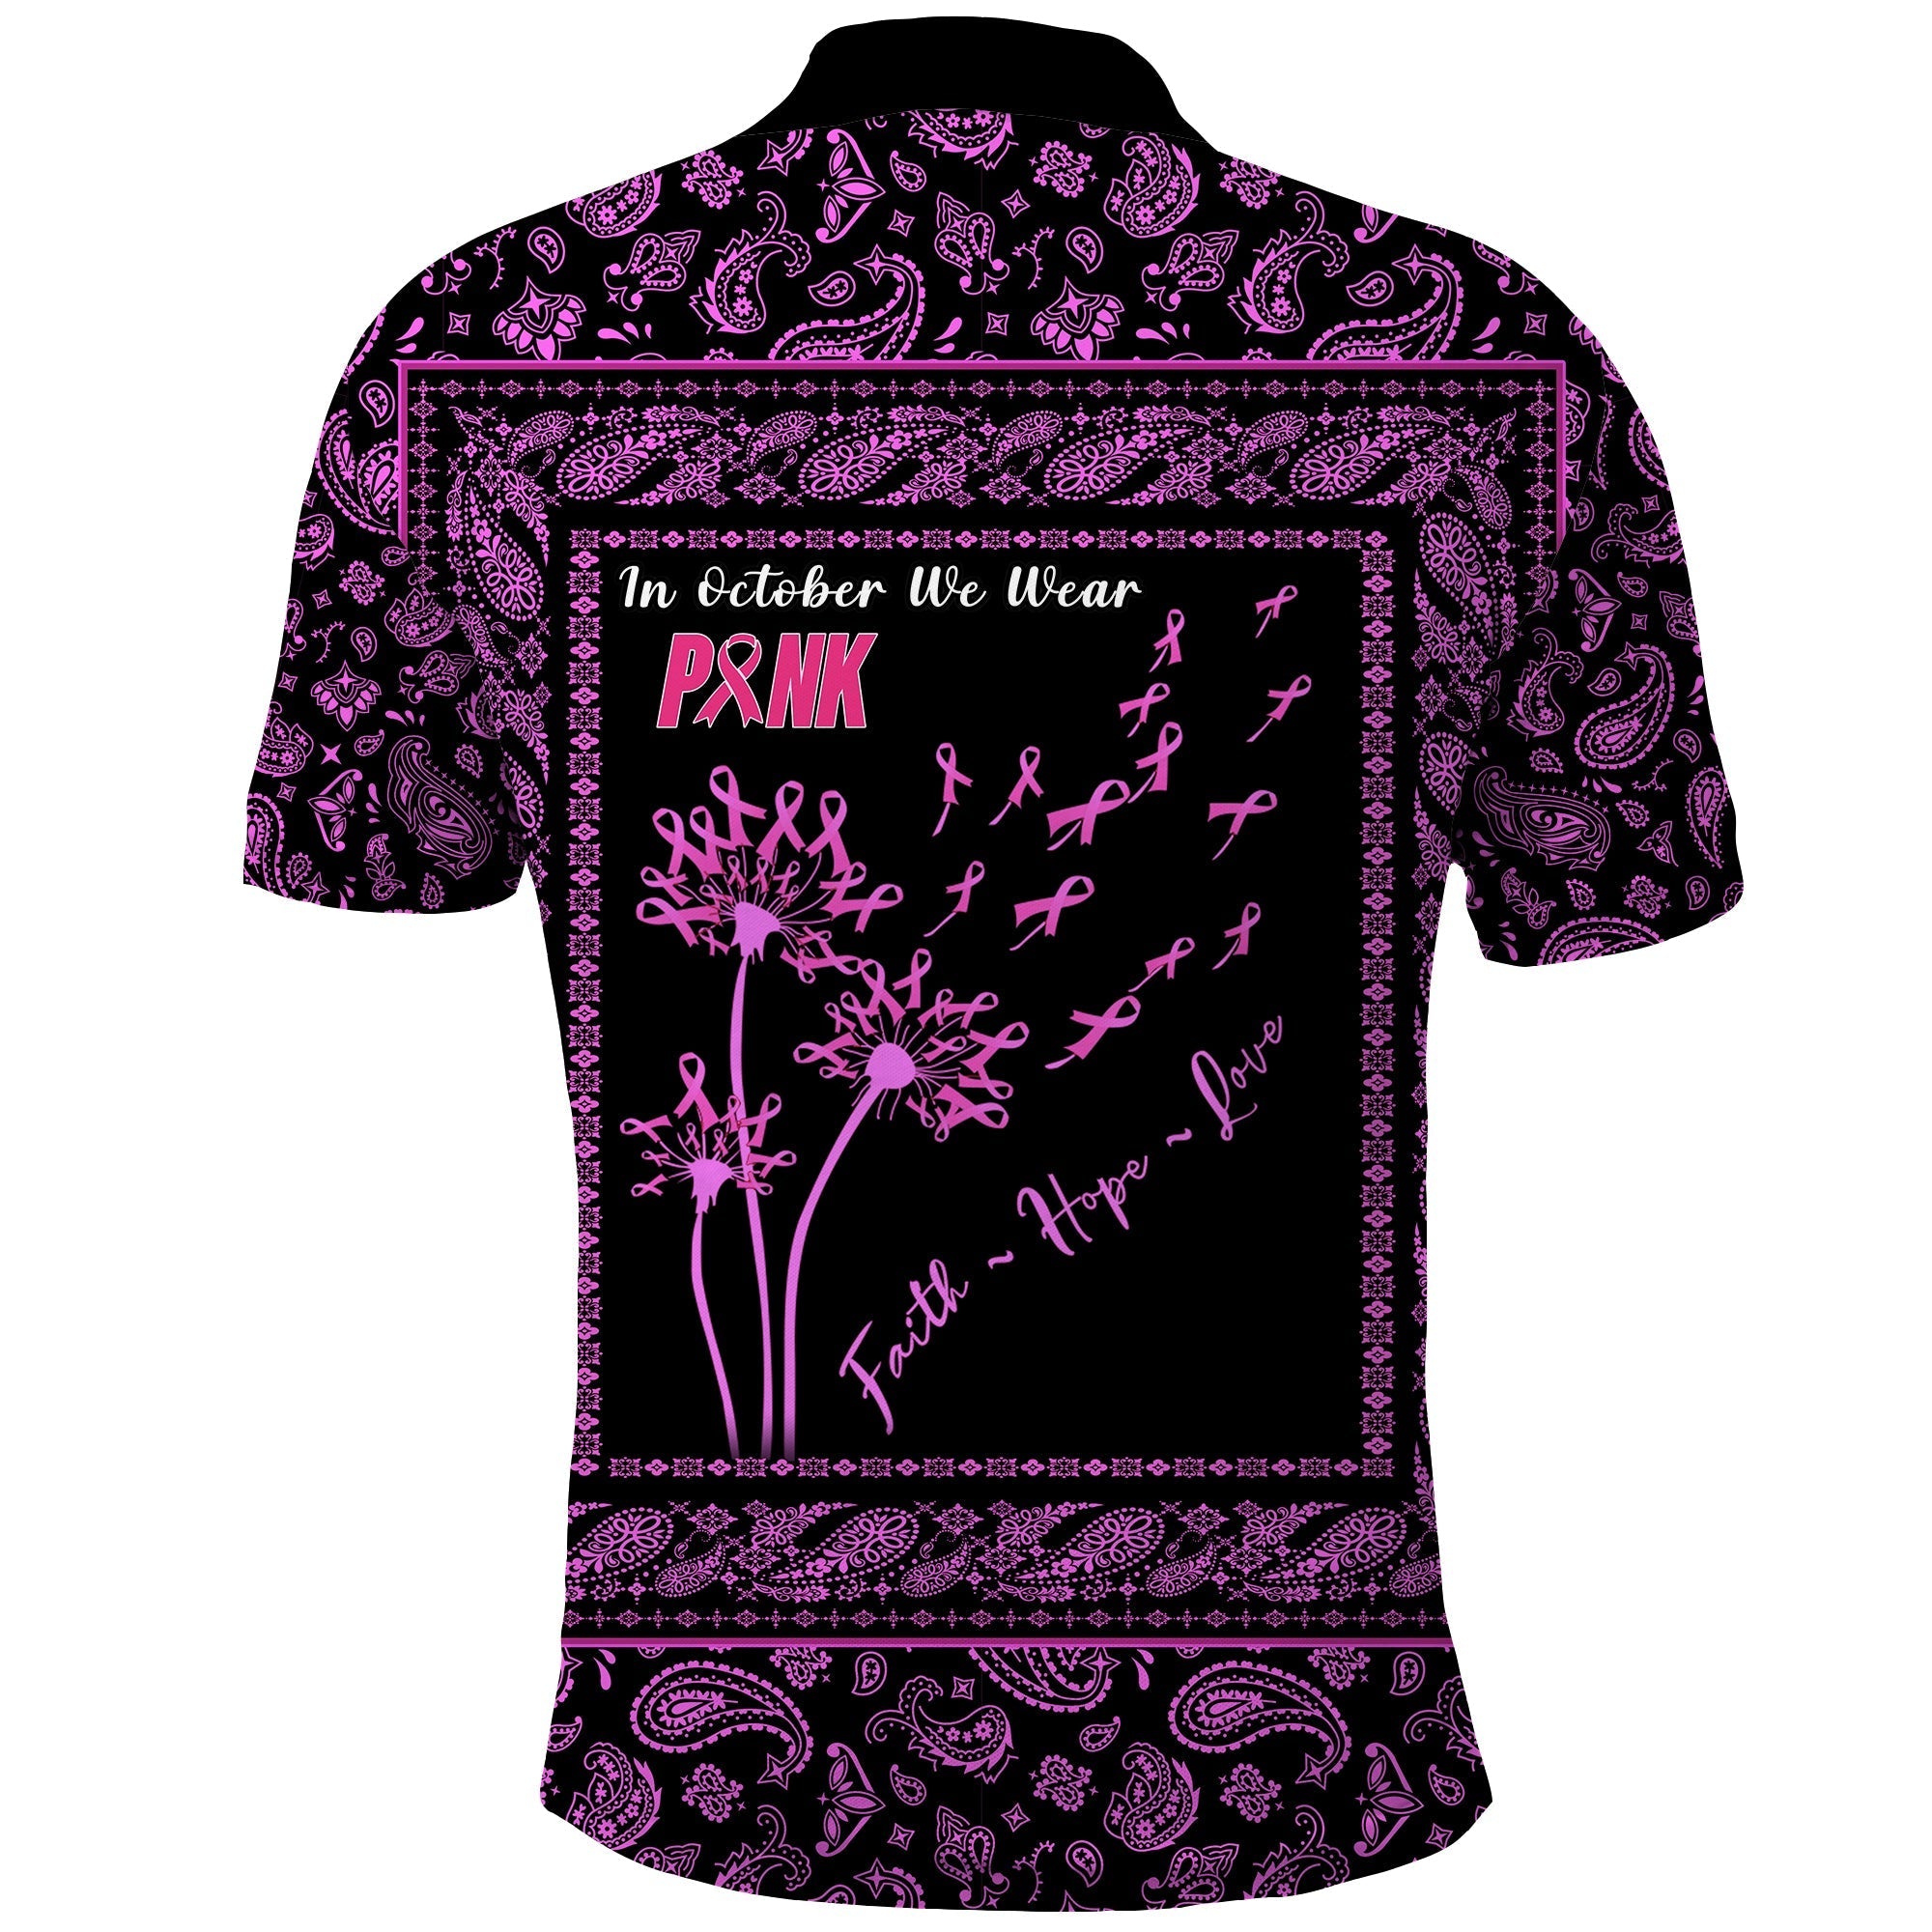 custom-personalised-breast-cancer-polo-shirt-black-paisley-pattern-in-october-we-wear-pink